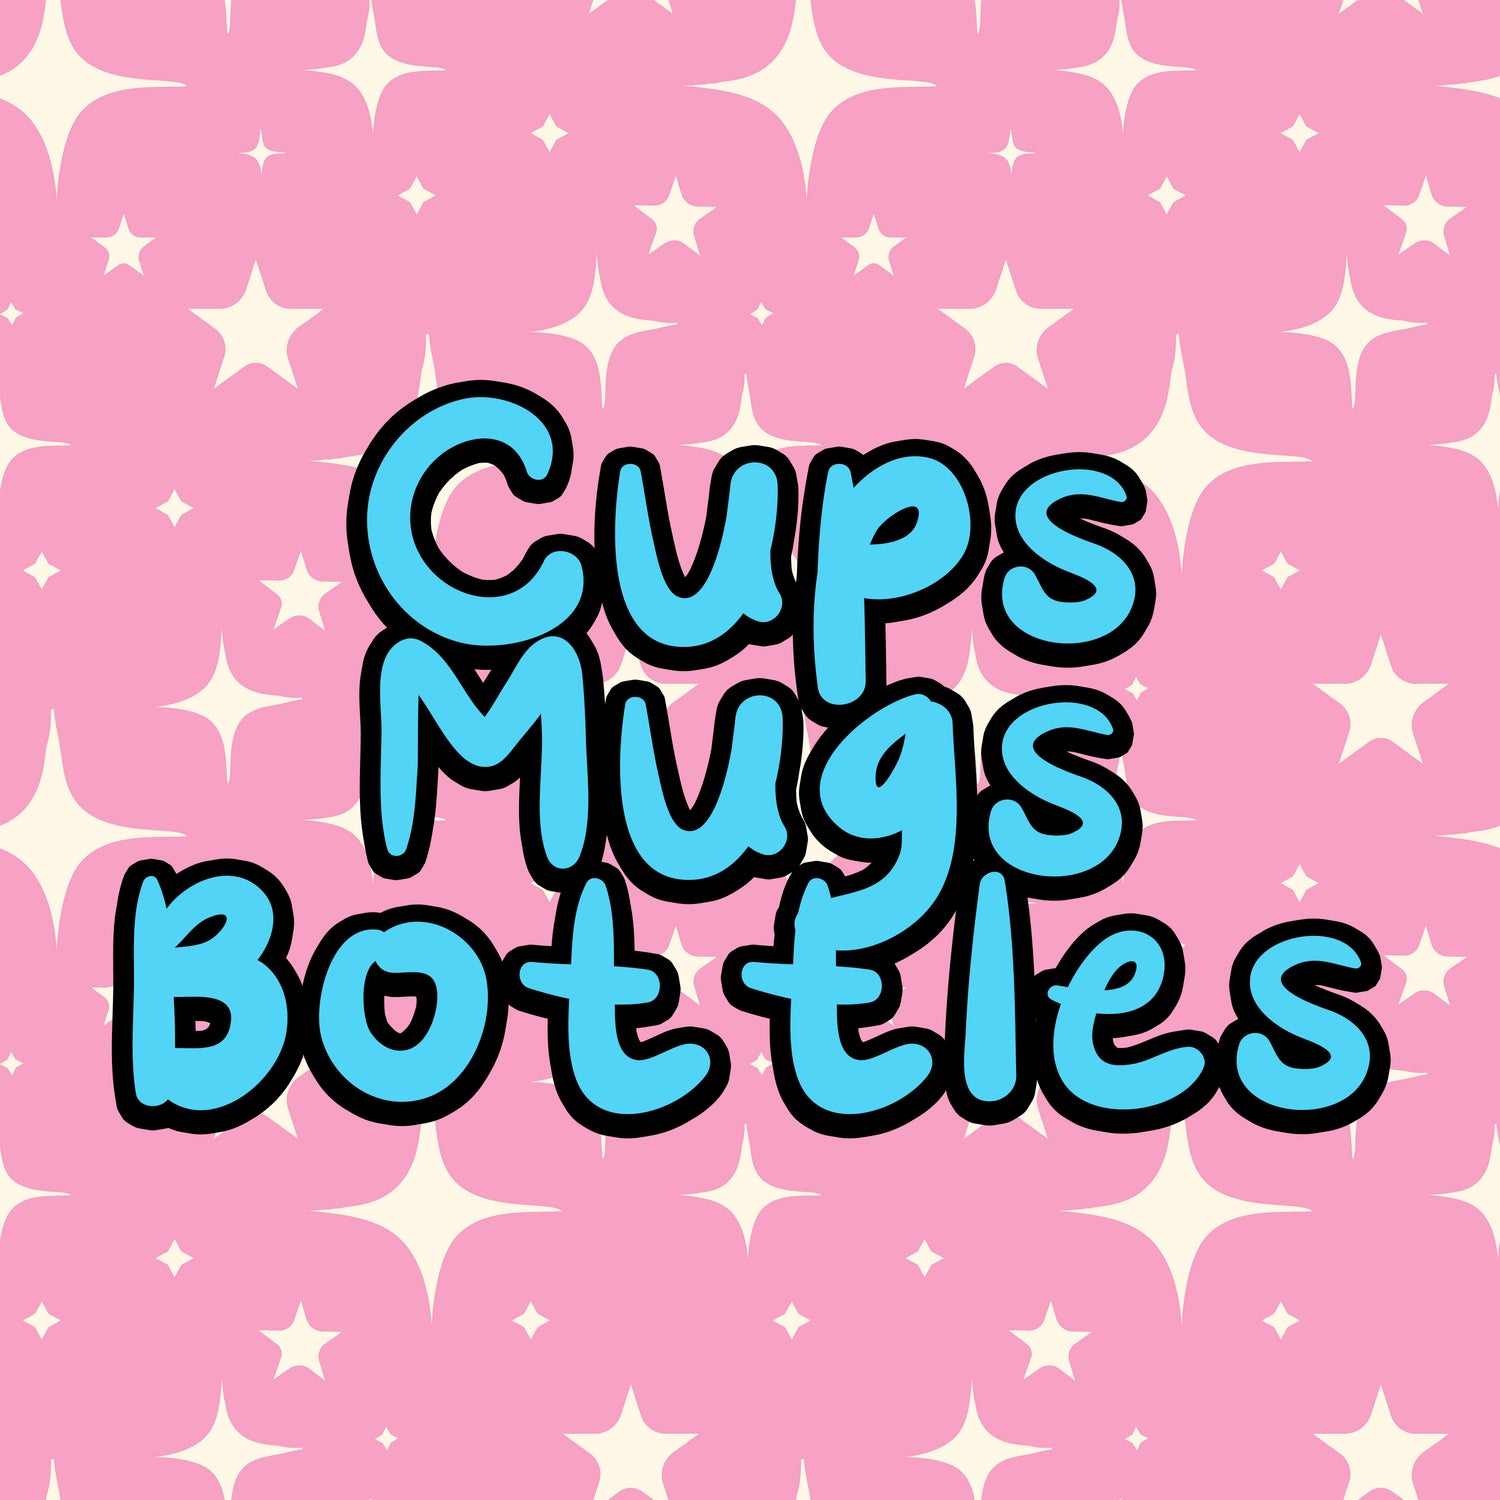 Cups, Mugs and Bottles